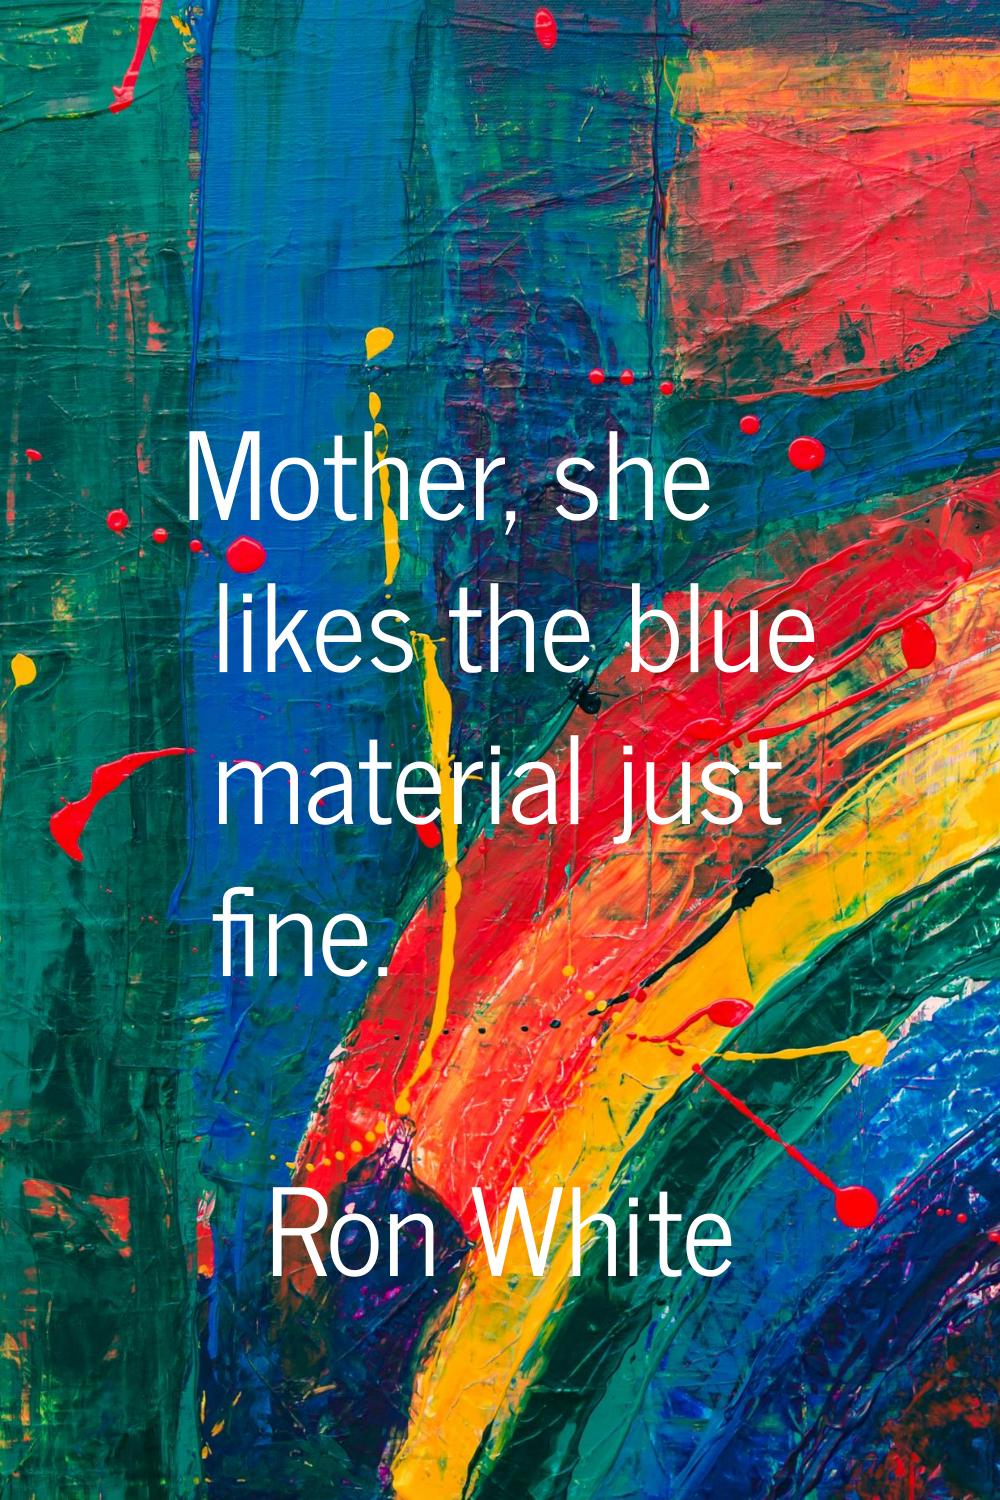 Mother, she likes the blue material just fine.